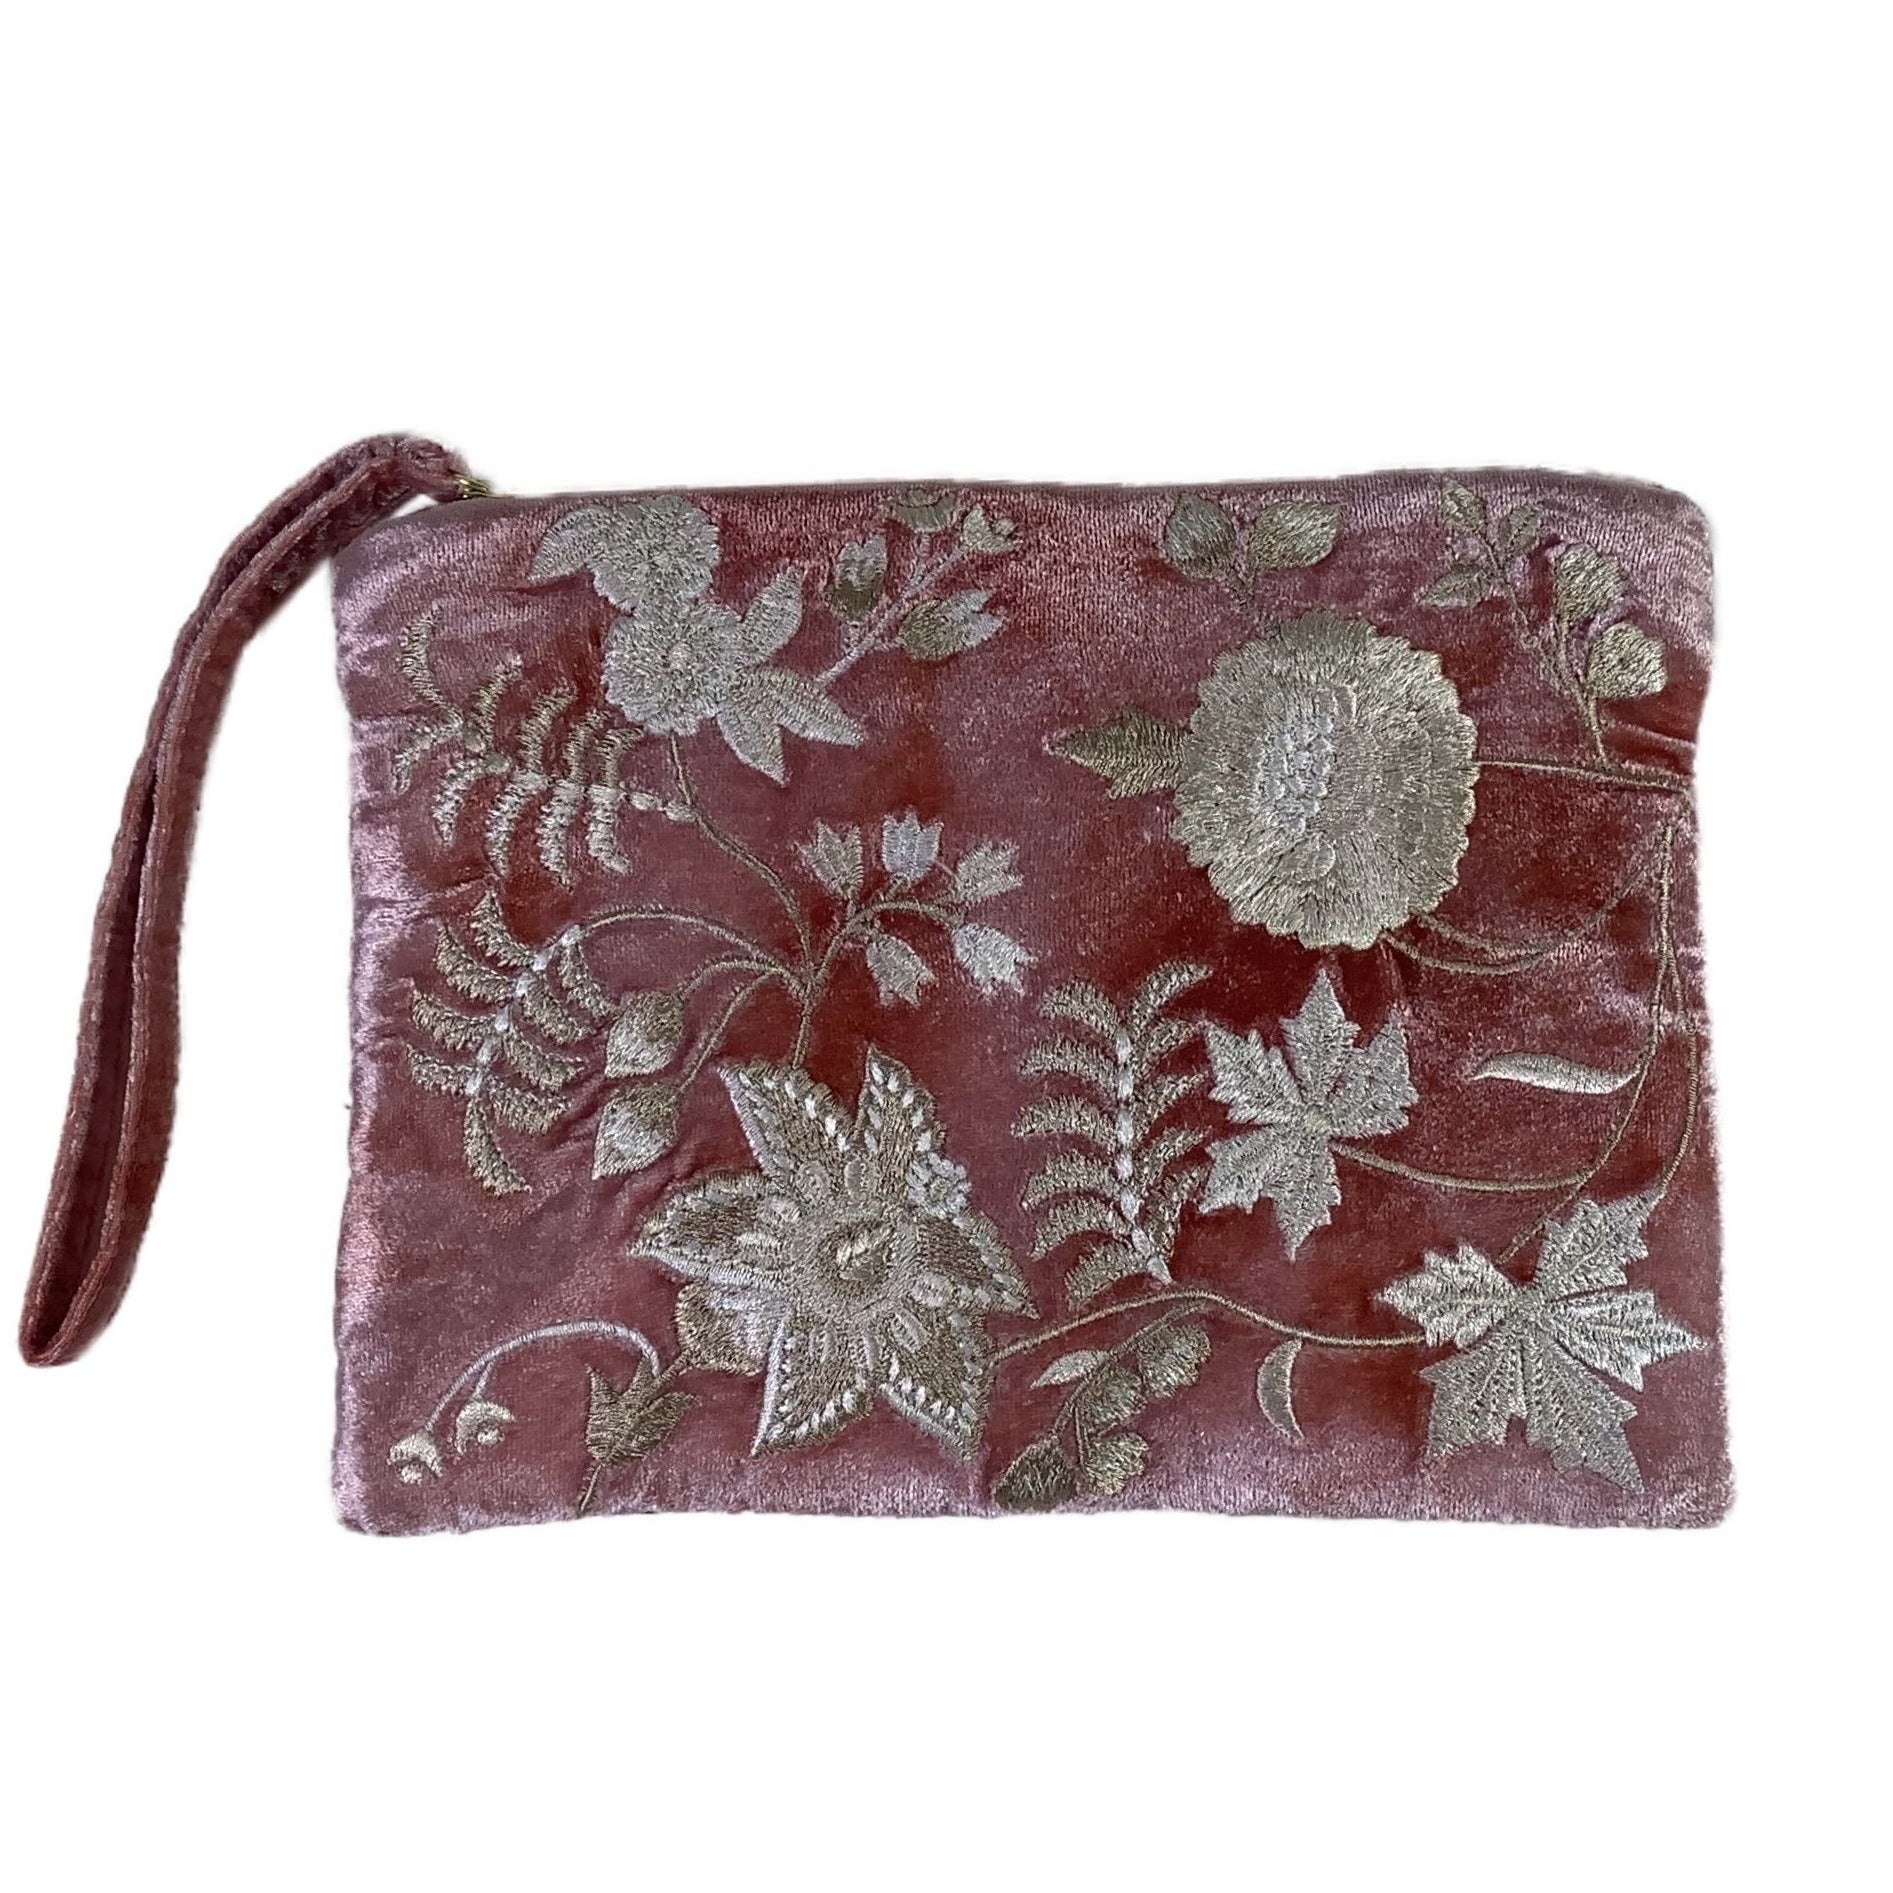 Madame Bovary Velvet Zip Pouch in Shaded Rose